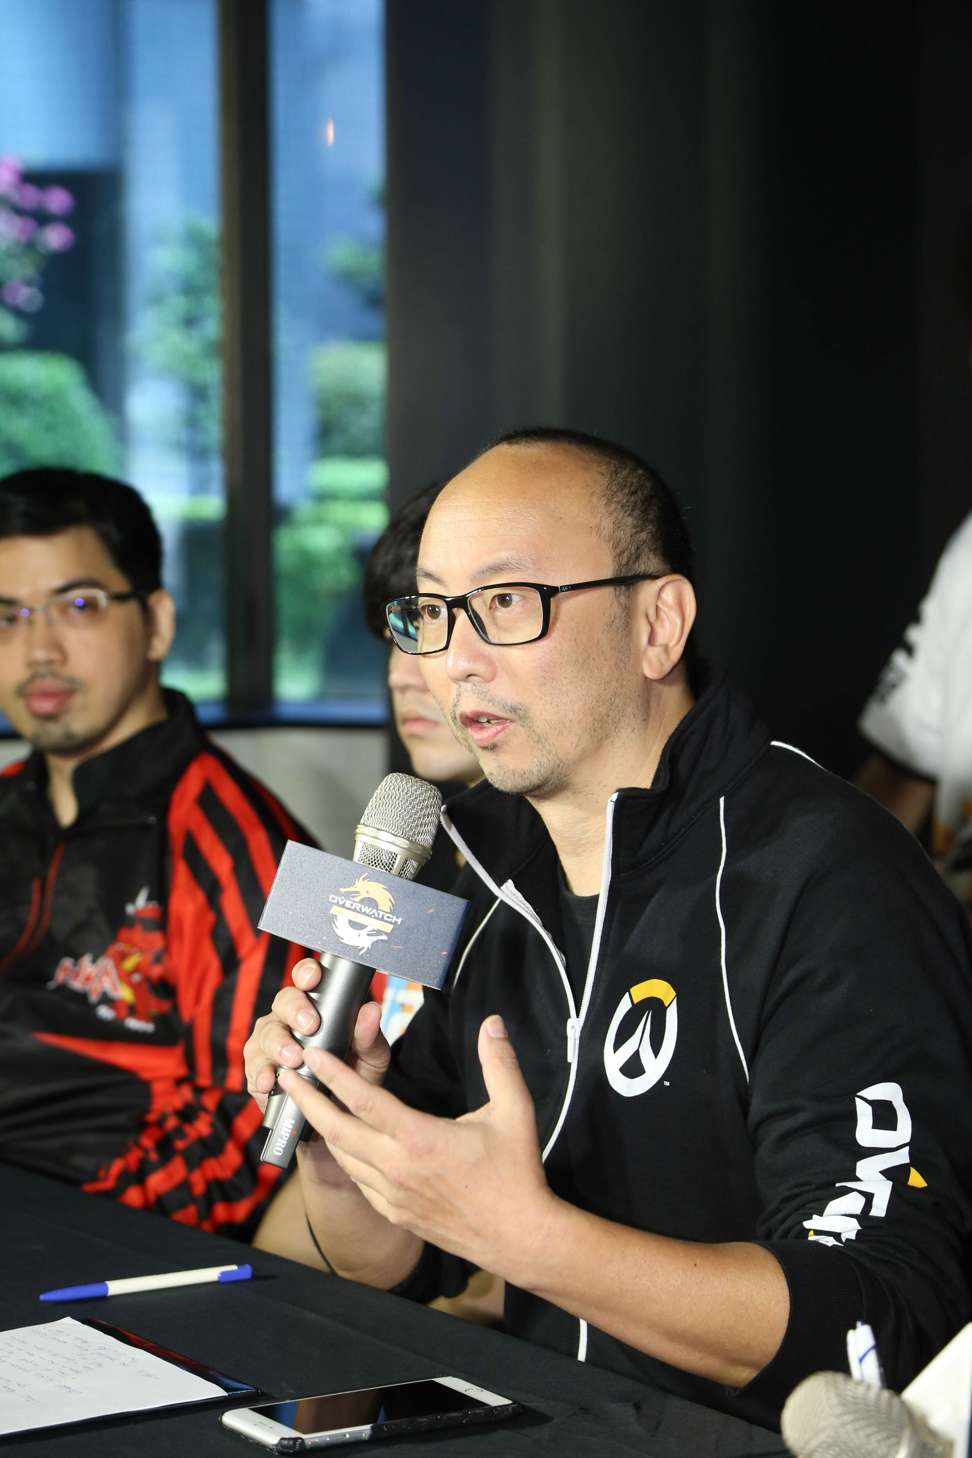 Eddy Meng, managing director of Blizzard Entertainment for Taiwan, Hong Kong and Macau, at the Overwatch Pacific Championship in Taipei. Photo: Ben Sin